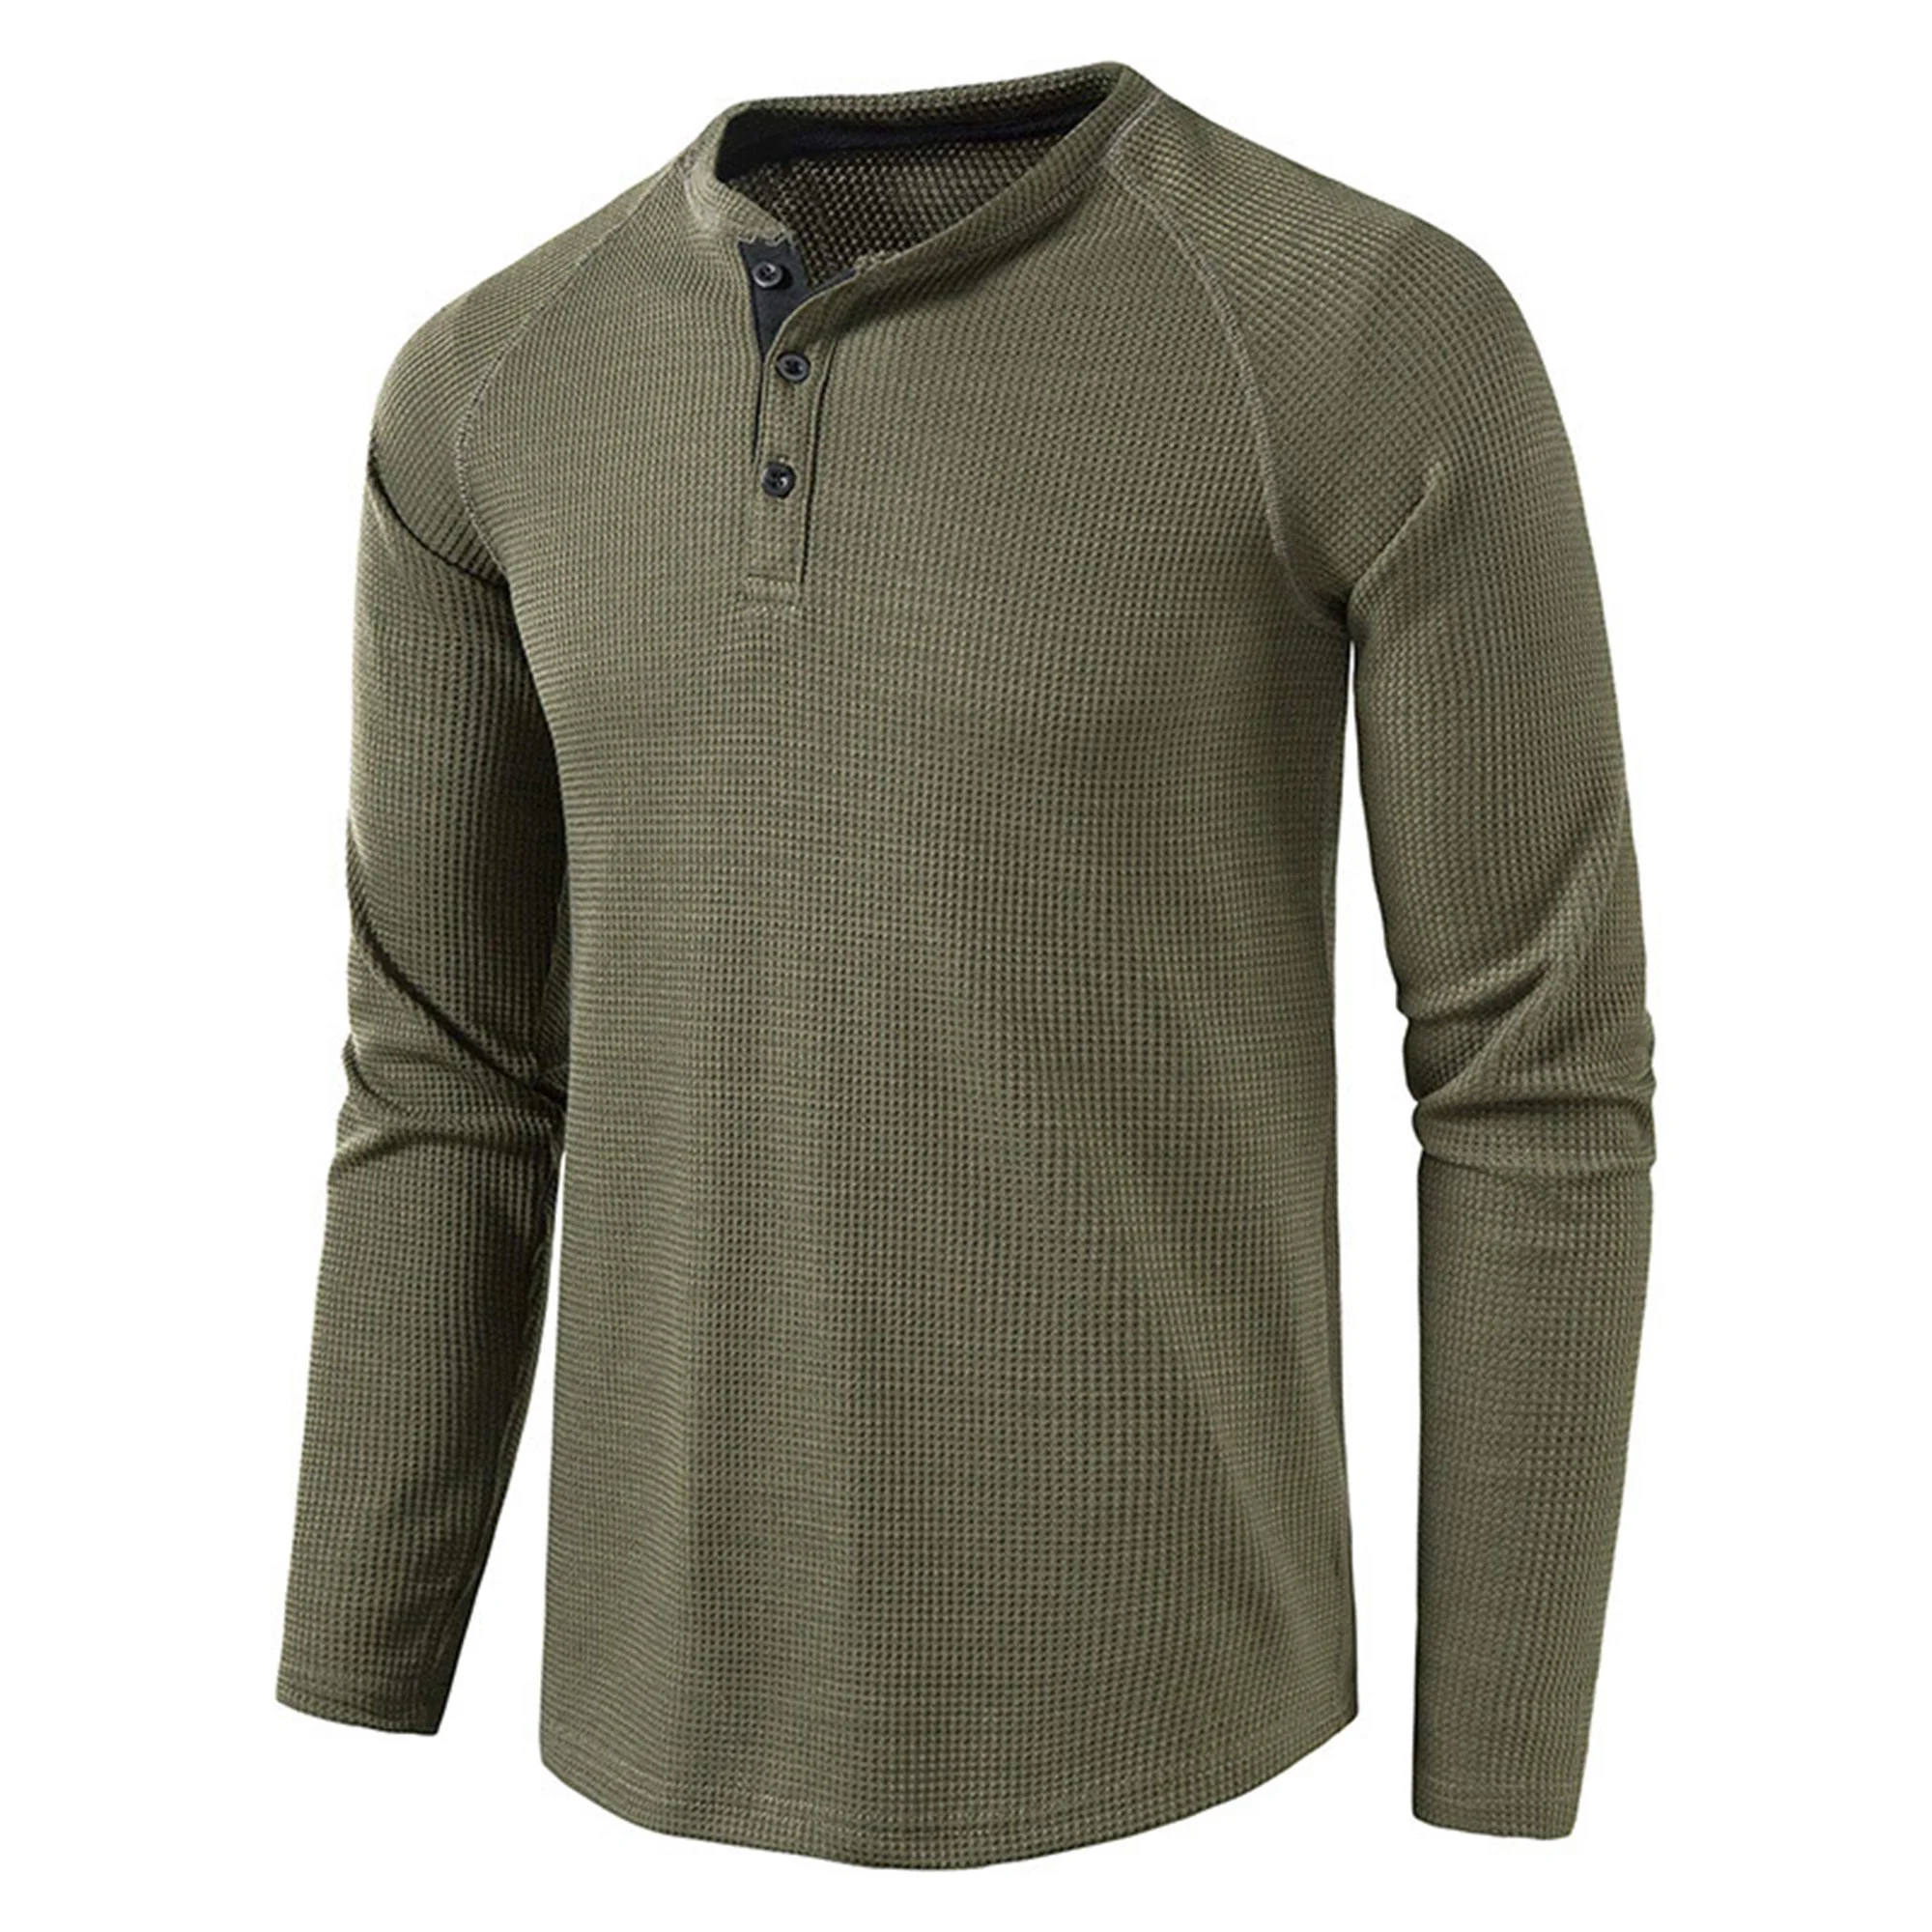 Mens Casual Slim Fit Henley T Shirts from Bangladesh Knitwear Factory